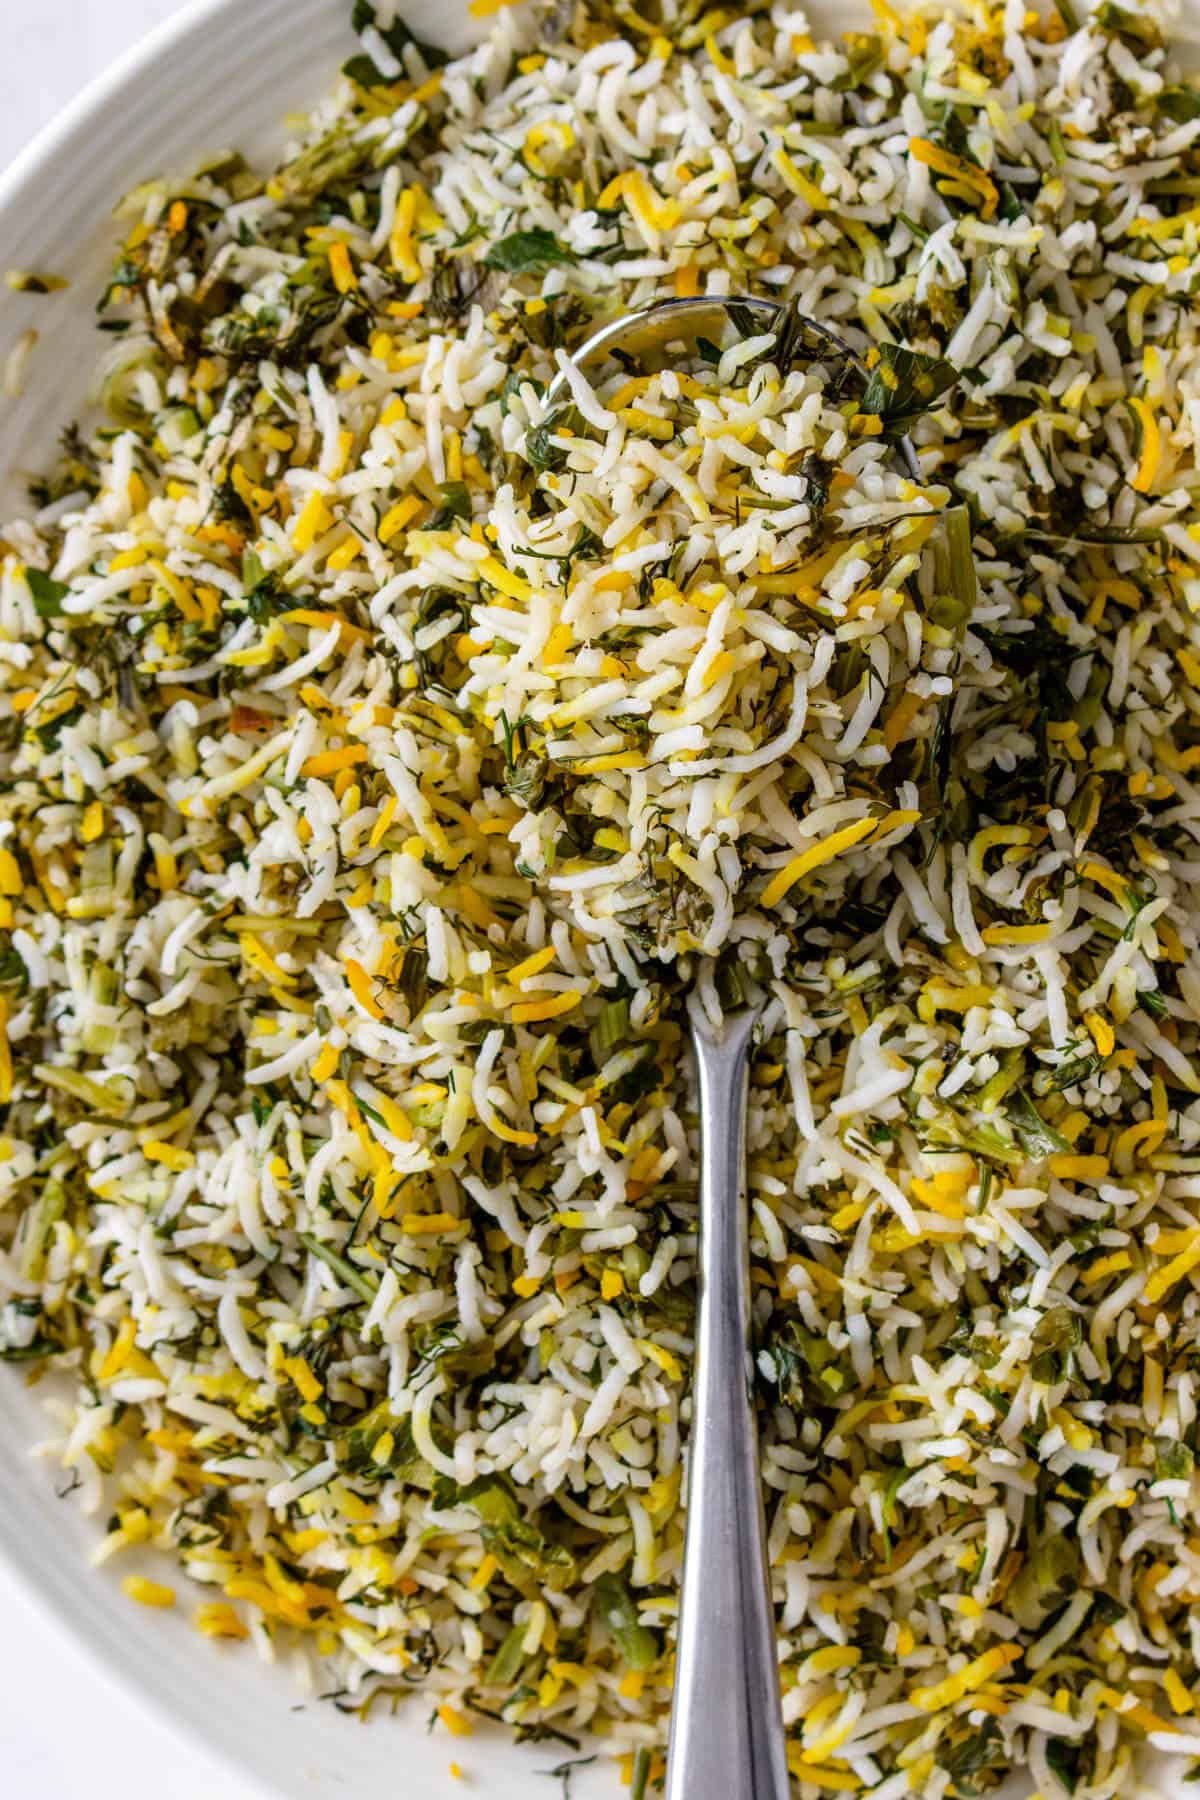 https://cookingwithayeh.com/wp-content/uploads/2022/03/Sabzi-Polo-Persian-Herb-Rice-4.jpg